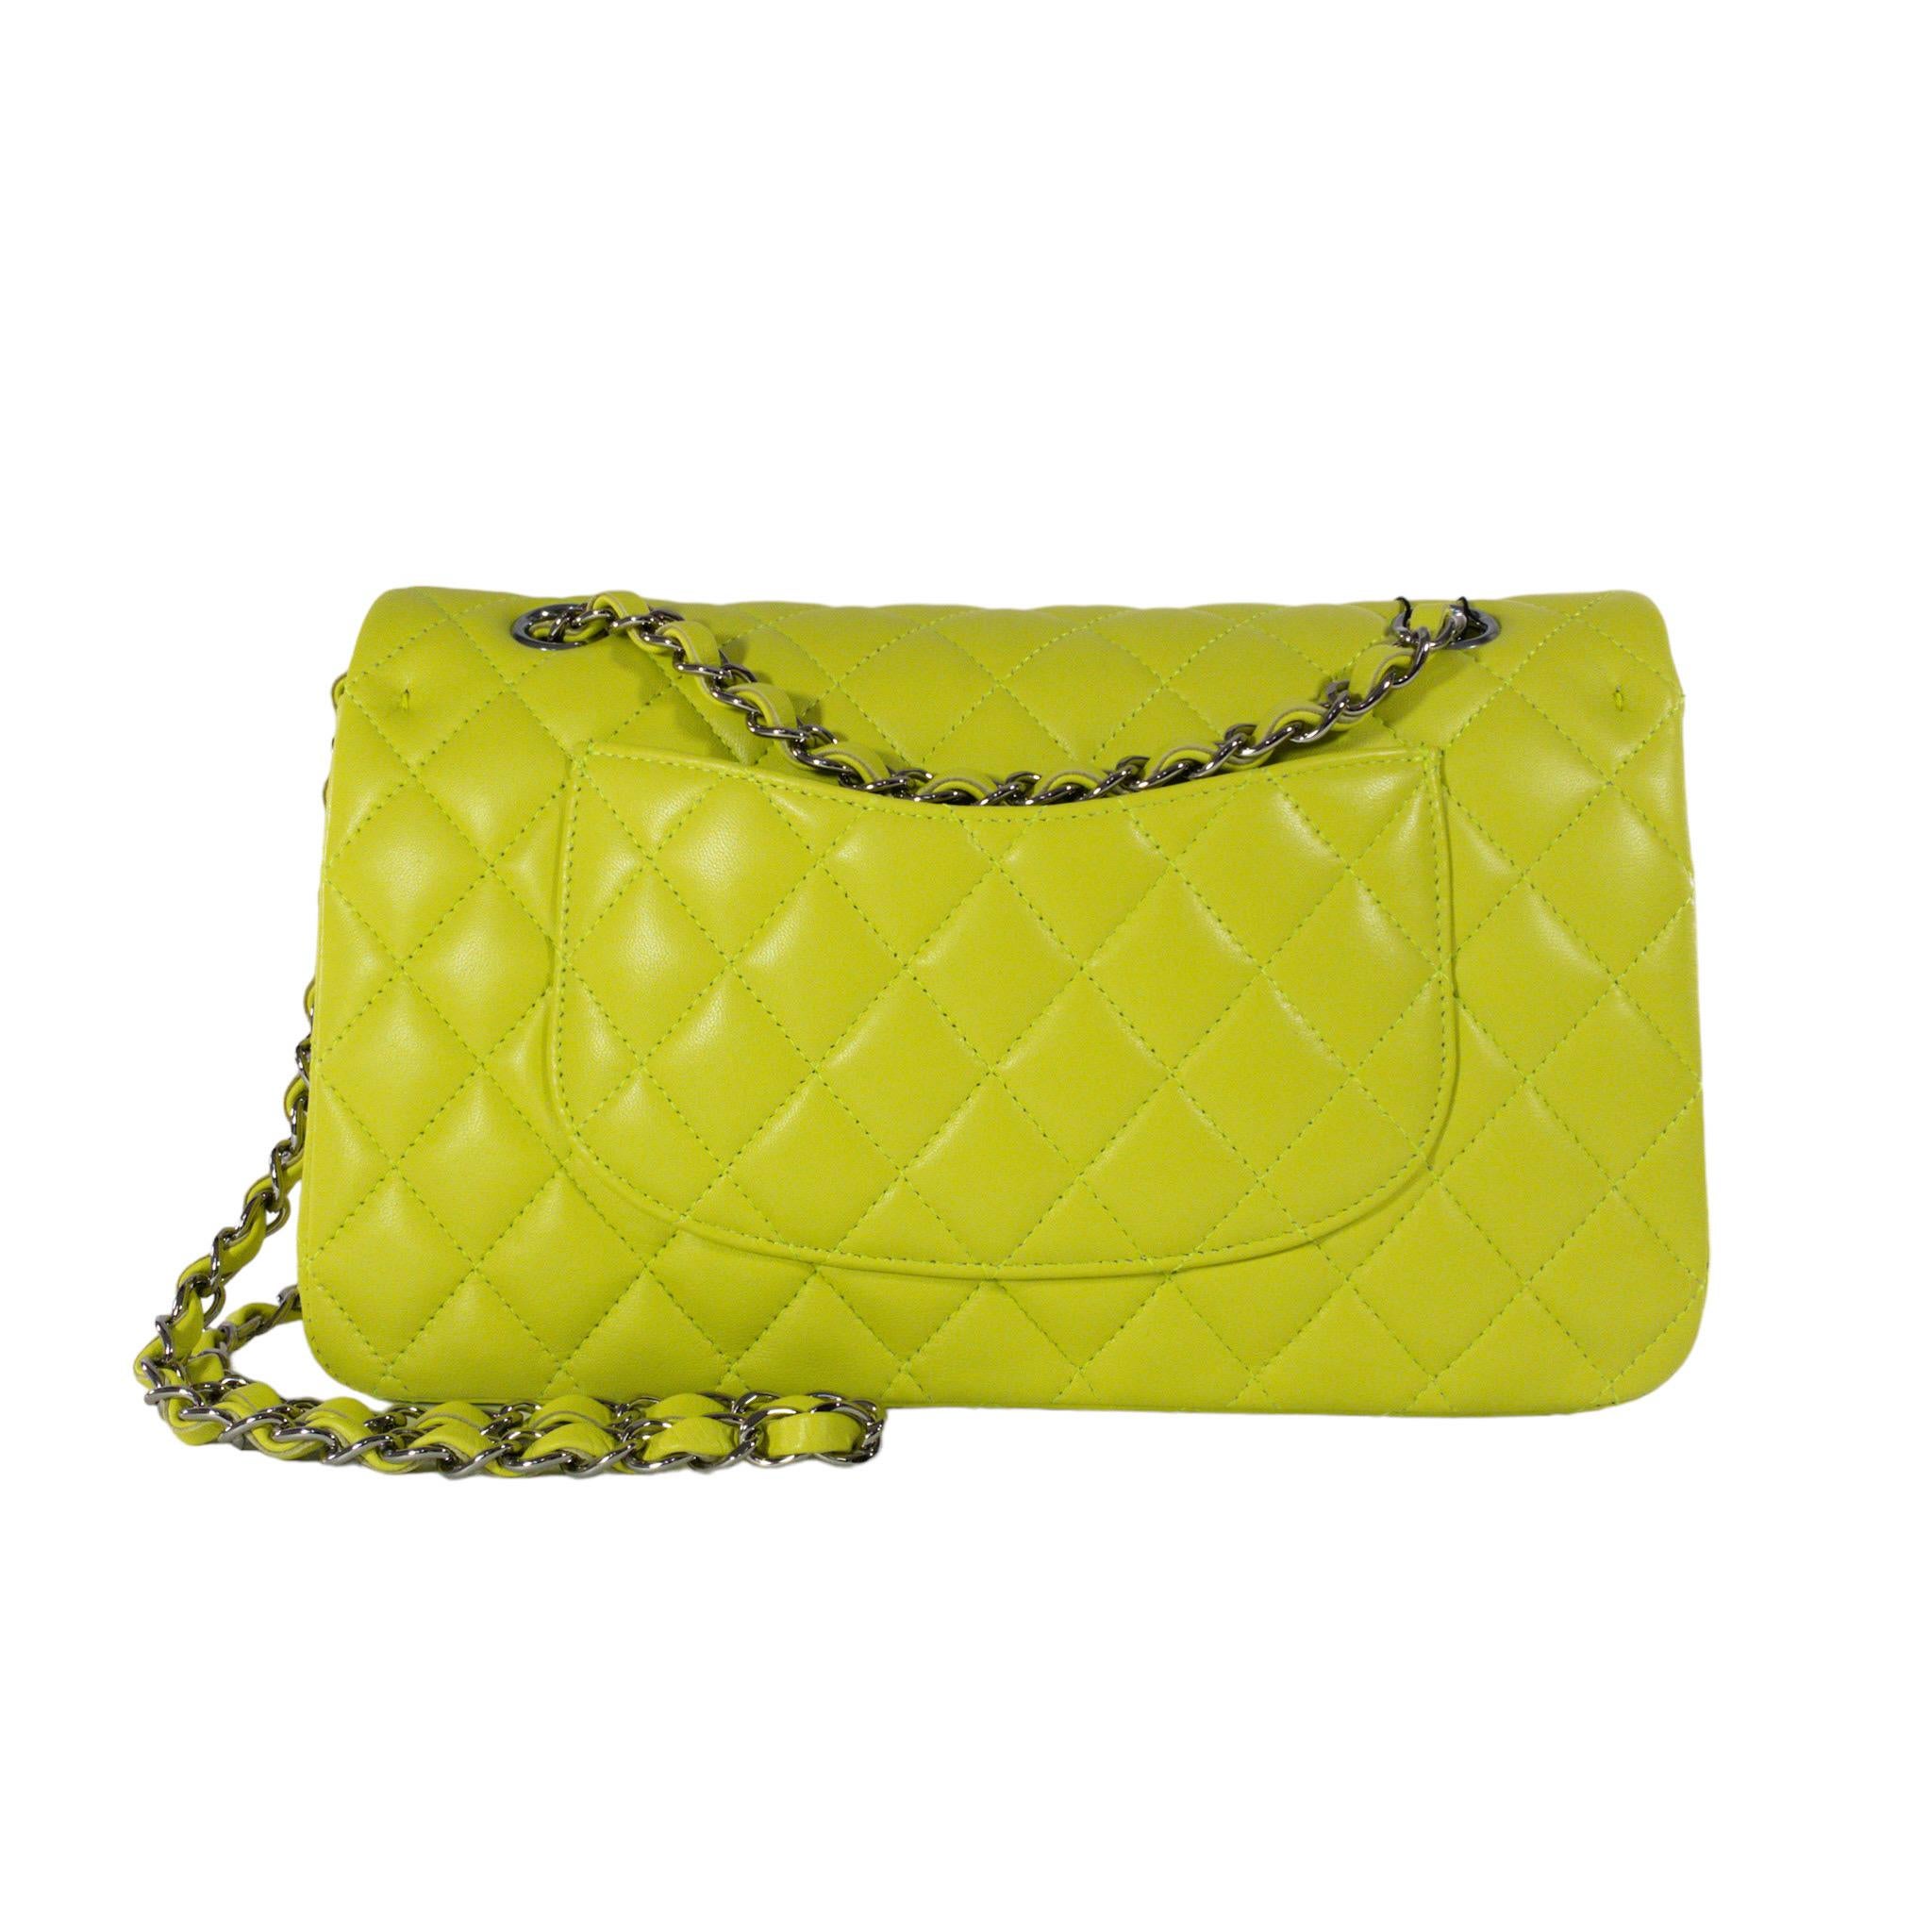 Consign of the Times presents this brand new authentic Chanel Medium Classic Flap in neon green/yellow leather. The bag has a flap closure with a Double C logo turn lock.  The interior is leather and includes one slip pocket and one zip pocket, it